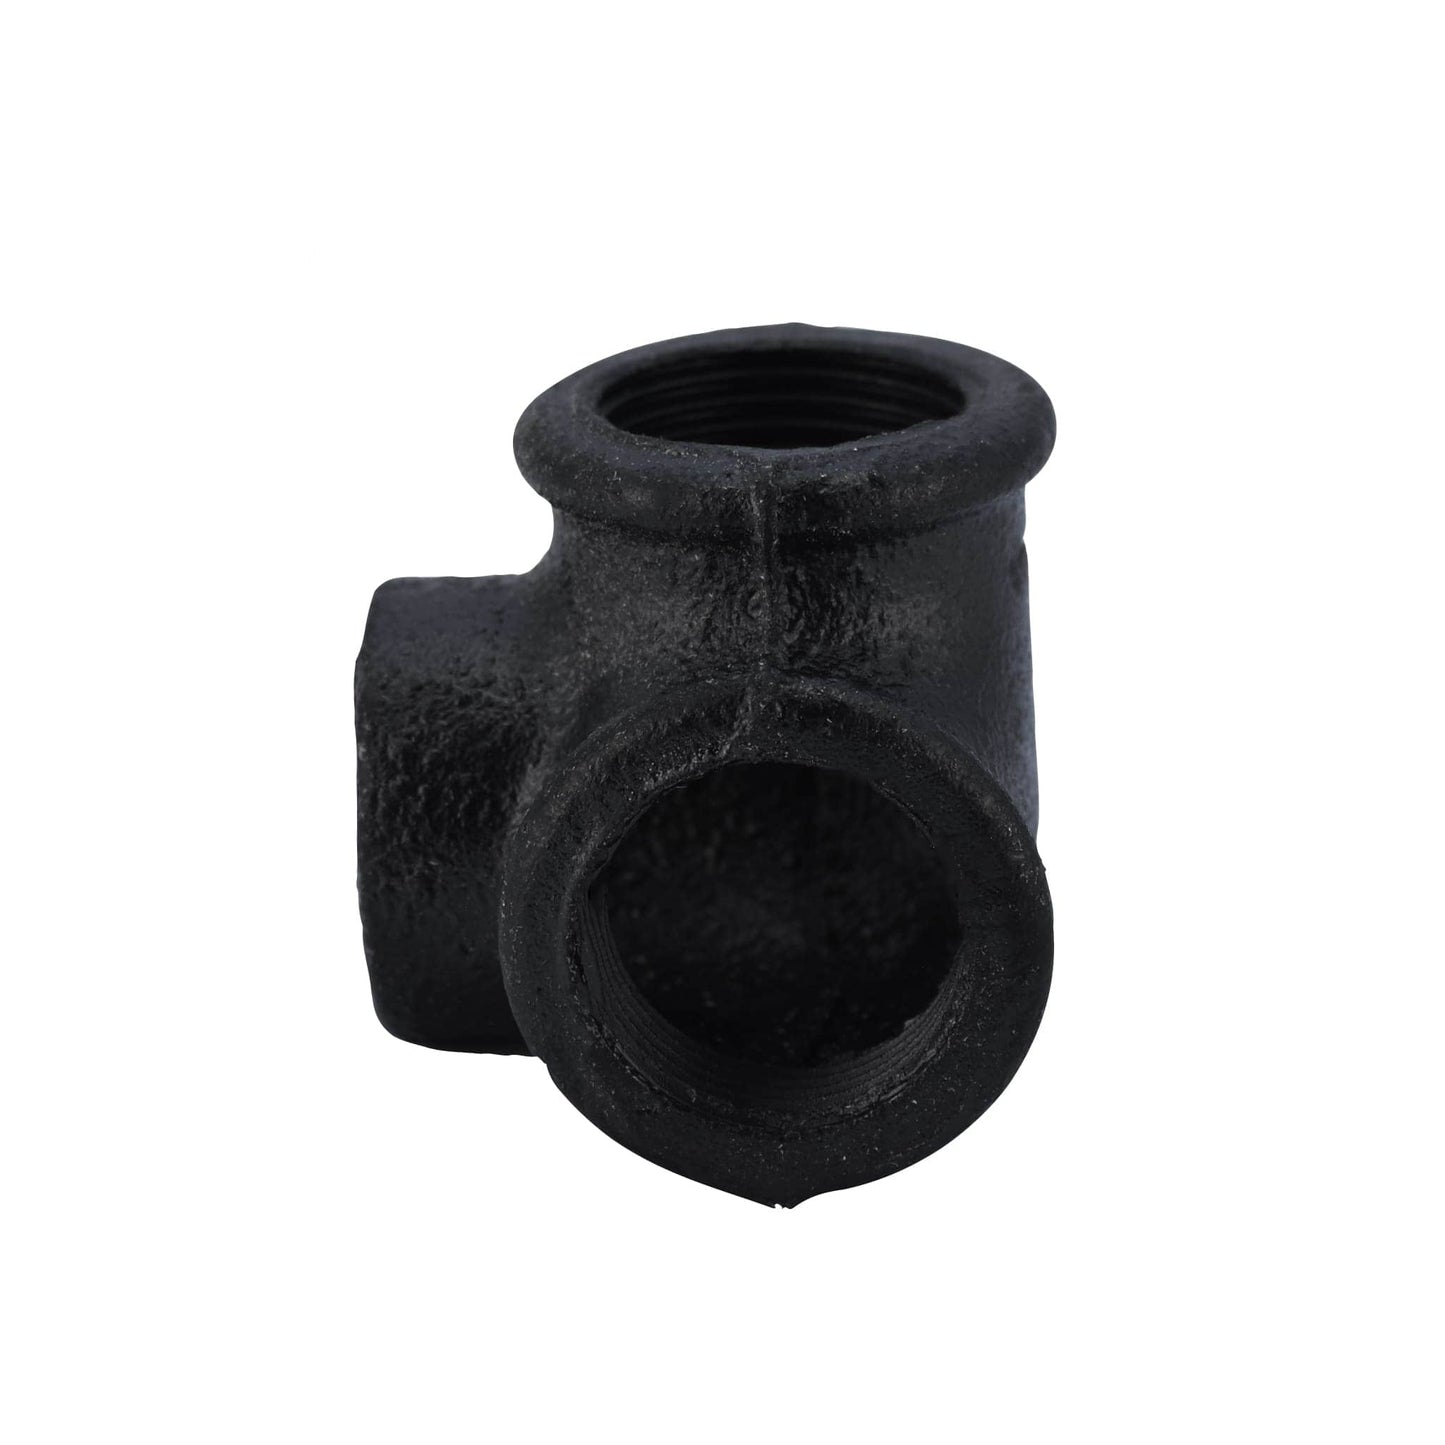 Classic Black Pipe Fittings (20mm)